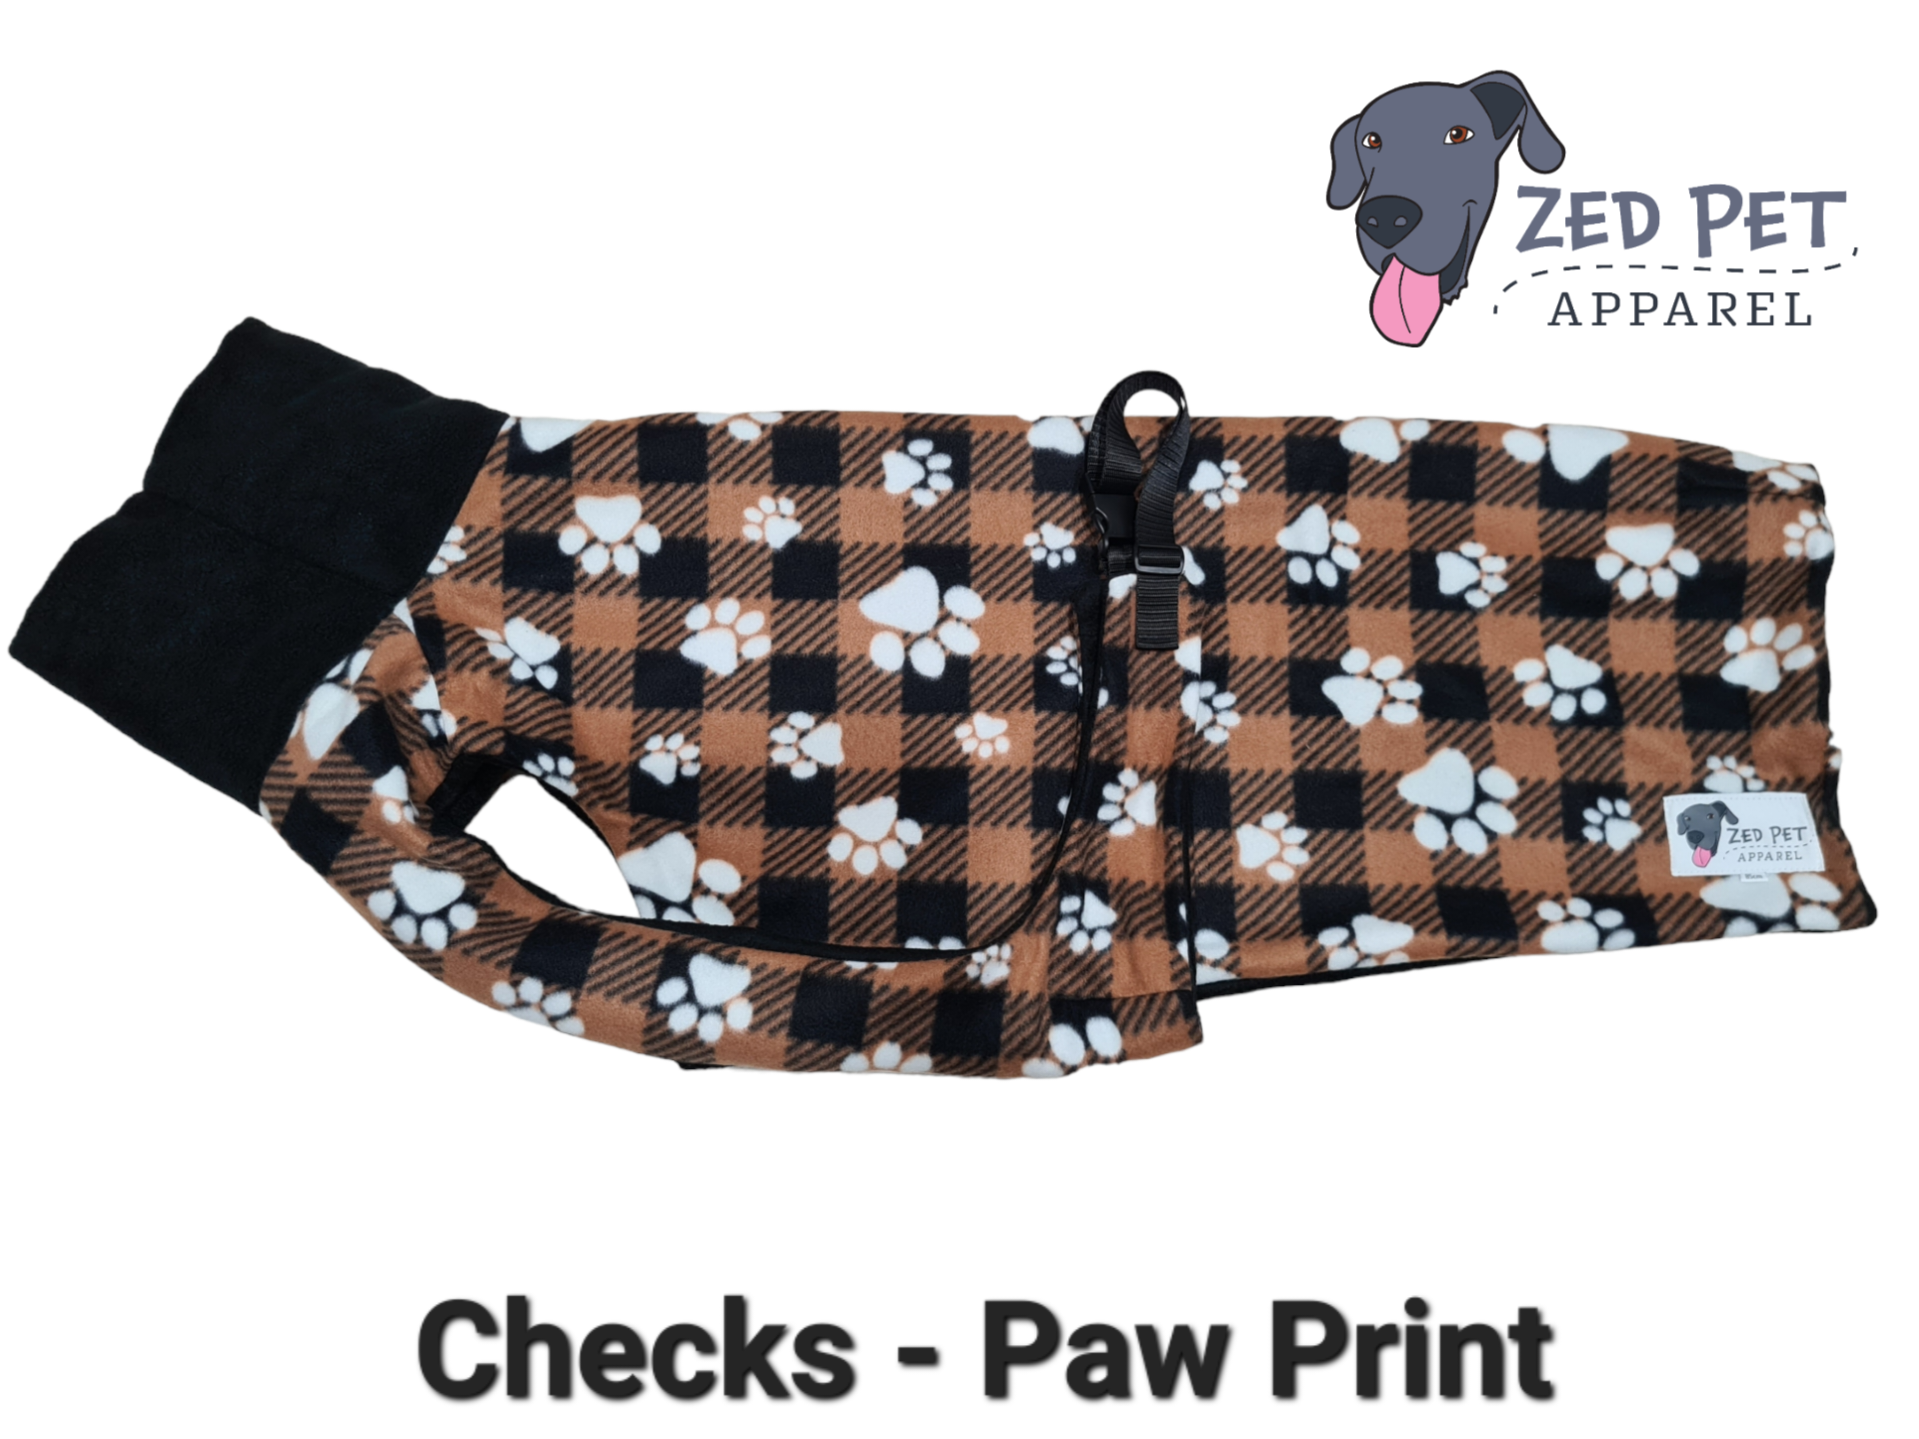 Brown and black check with white paw prints fleece great dane dog coat